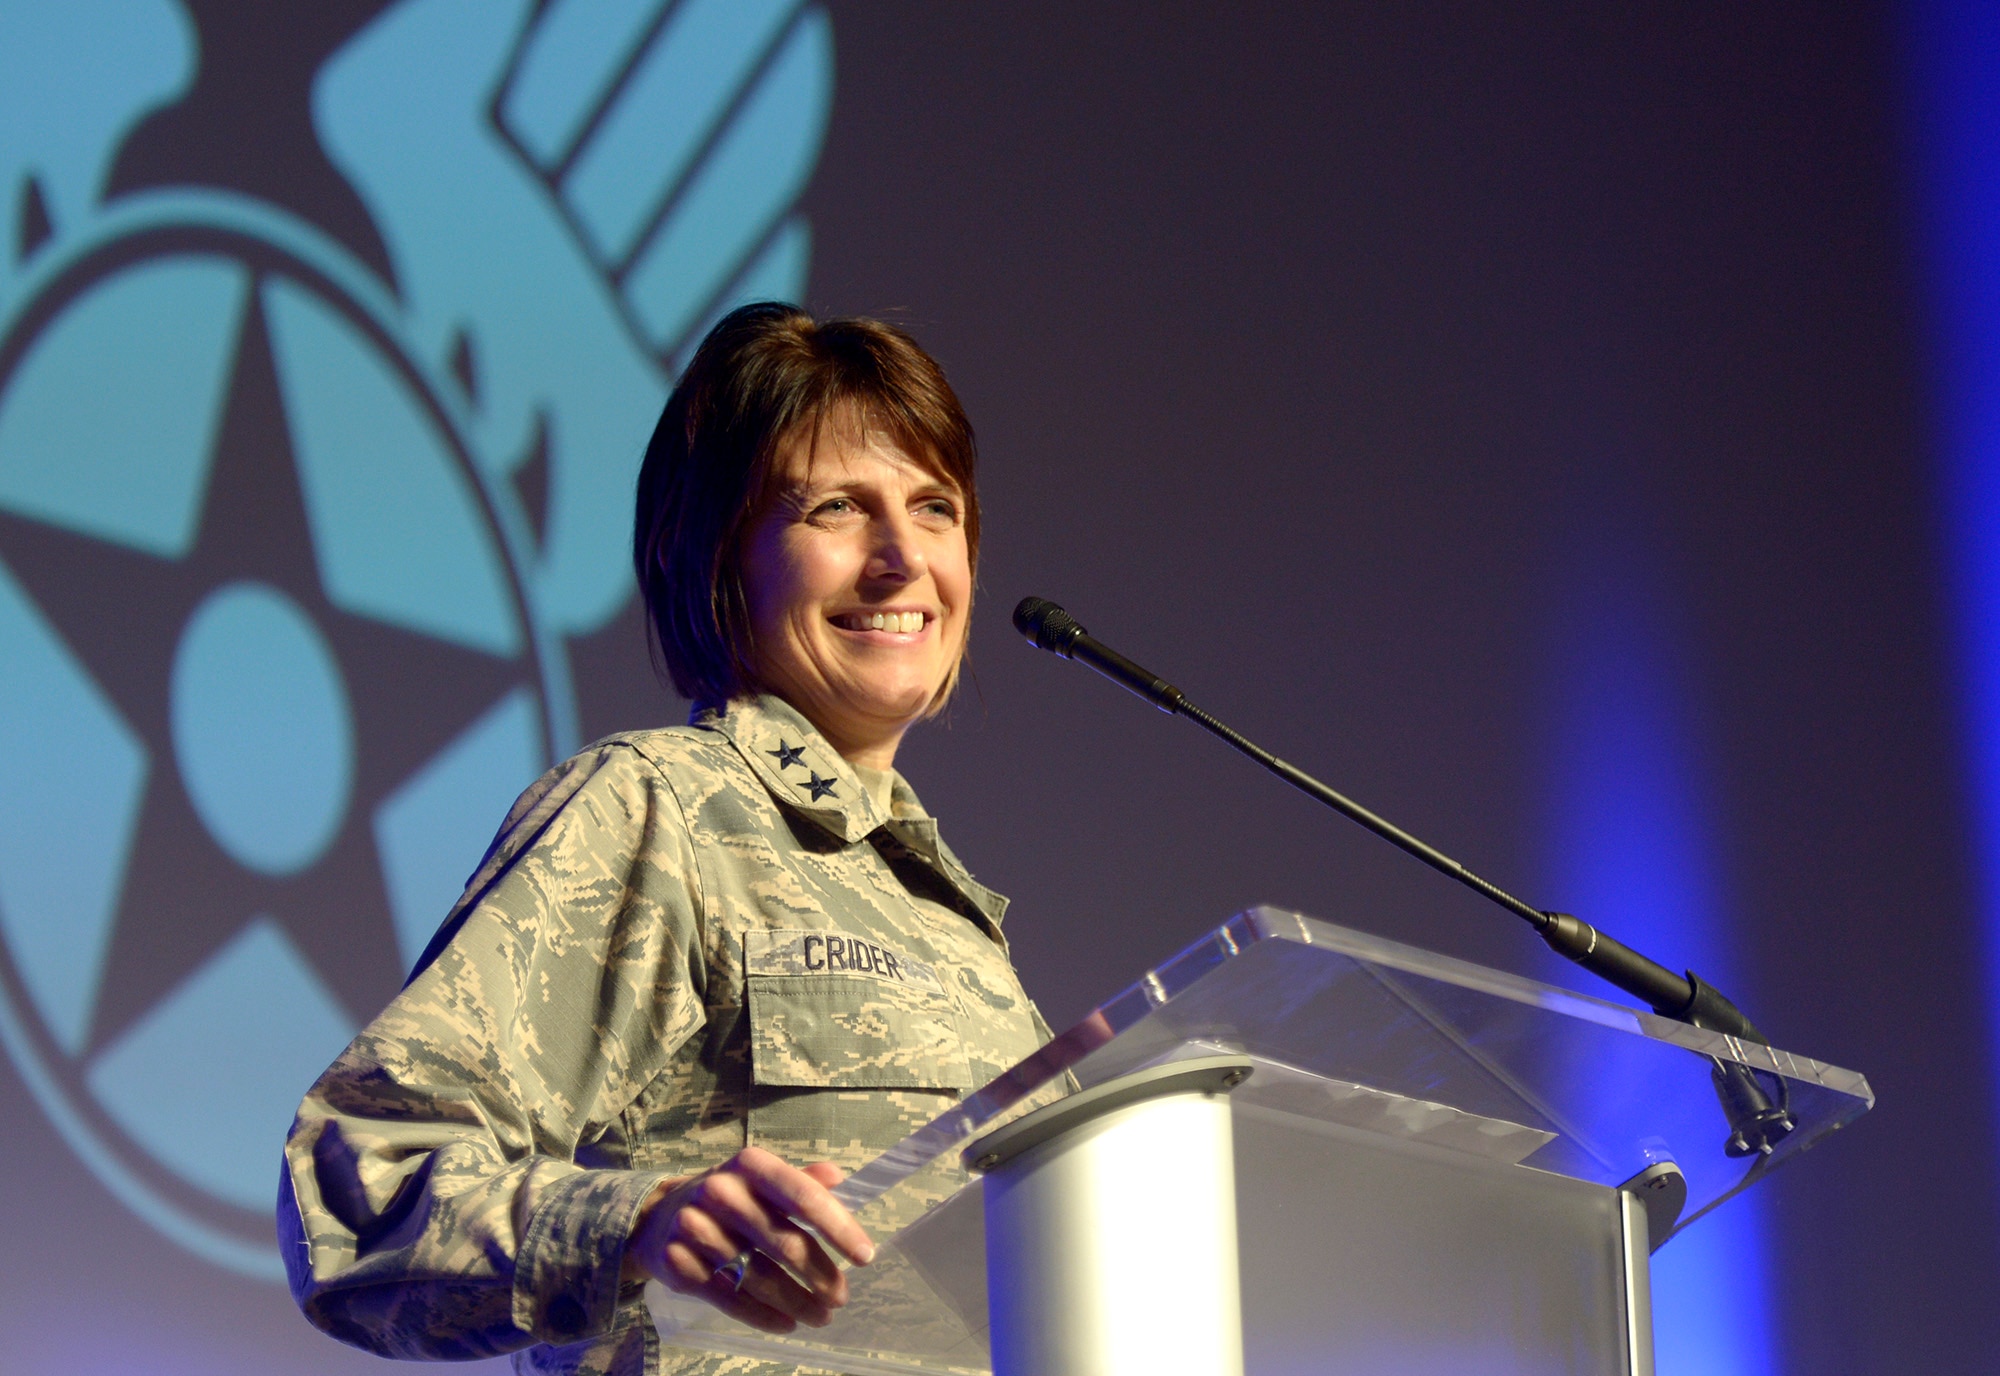 Maj. Gen. Kim Crider, Air Force chief data officer, speaks during the Air Force Association Air Warfare Symposium Feb. 23, 2018, Orlando, Fla. Founded in summer 2017, the Chief Data Office remains focused on unleashing the value of data across the Air Force. (U.S. Air Force photo by Staff Sgt. Rusty Frank)